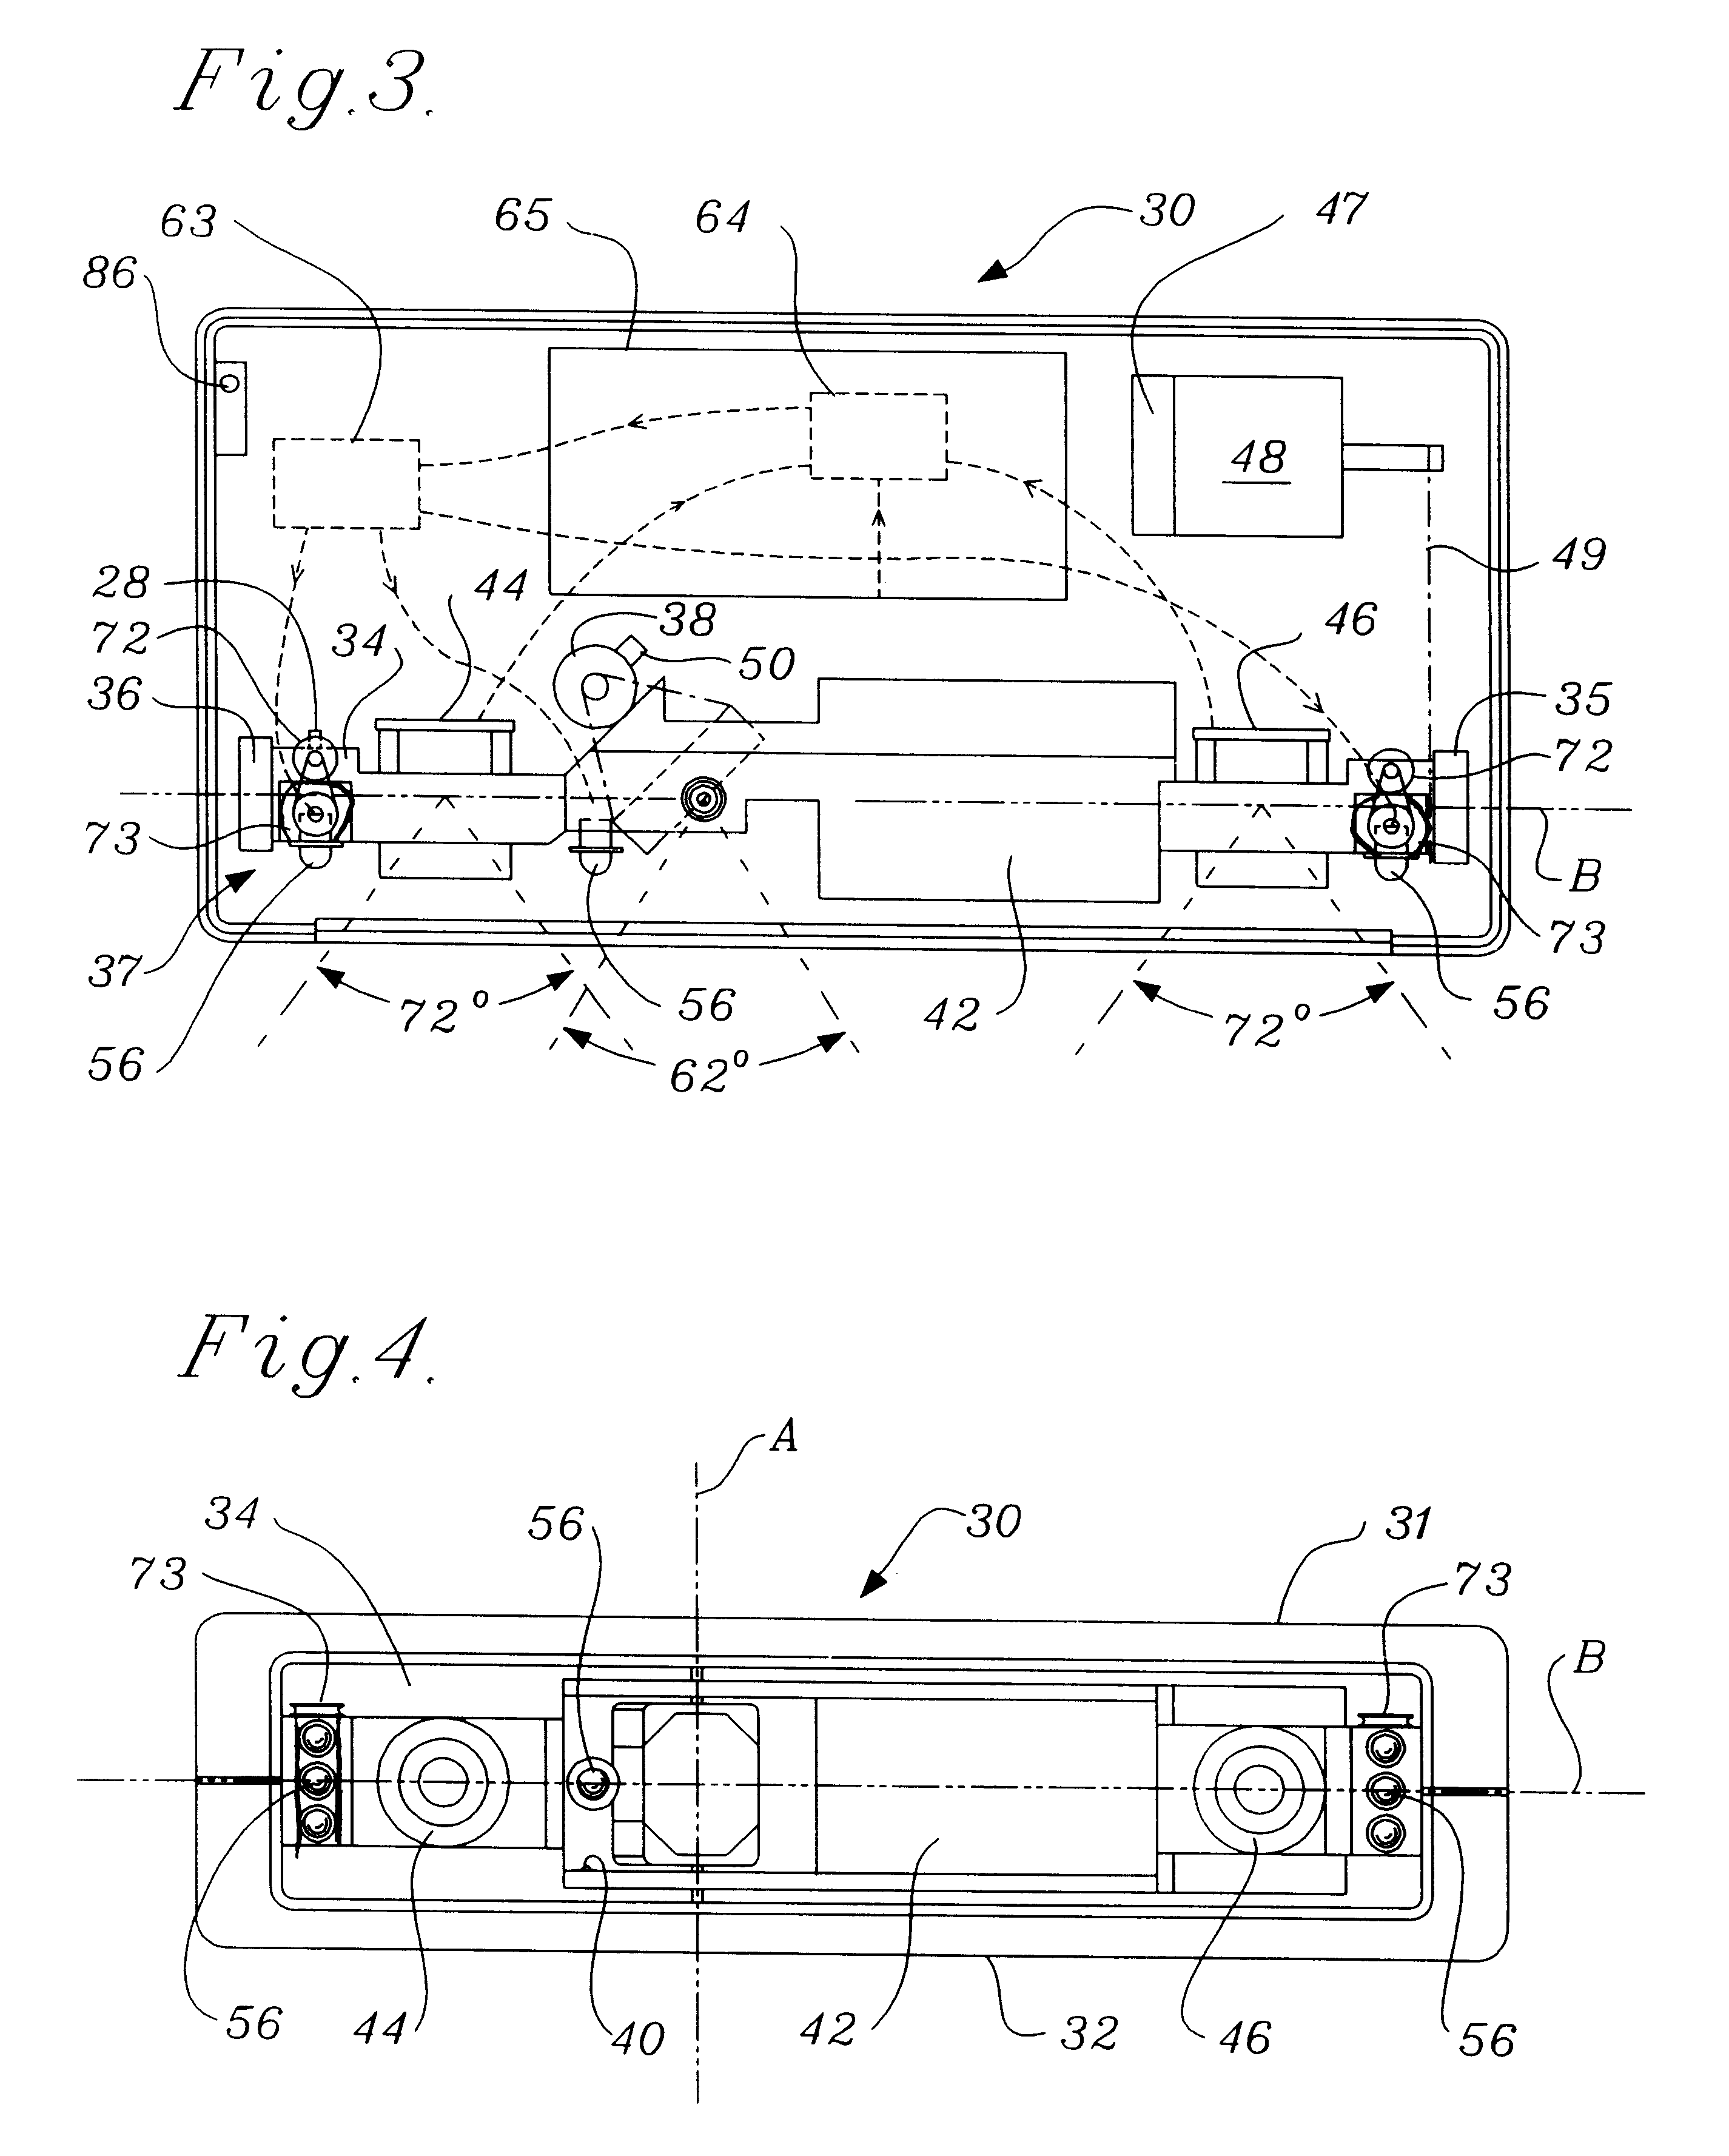 Compact imaging device incorporating rotatably mounted cameras